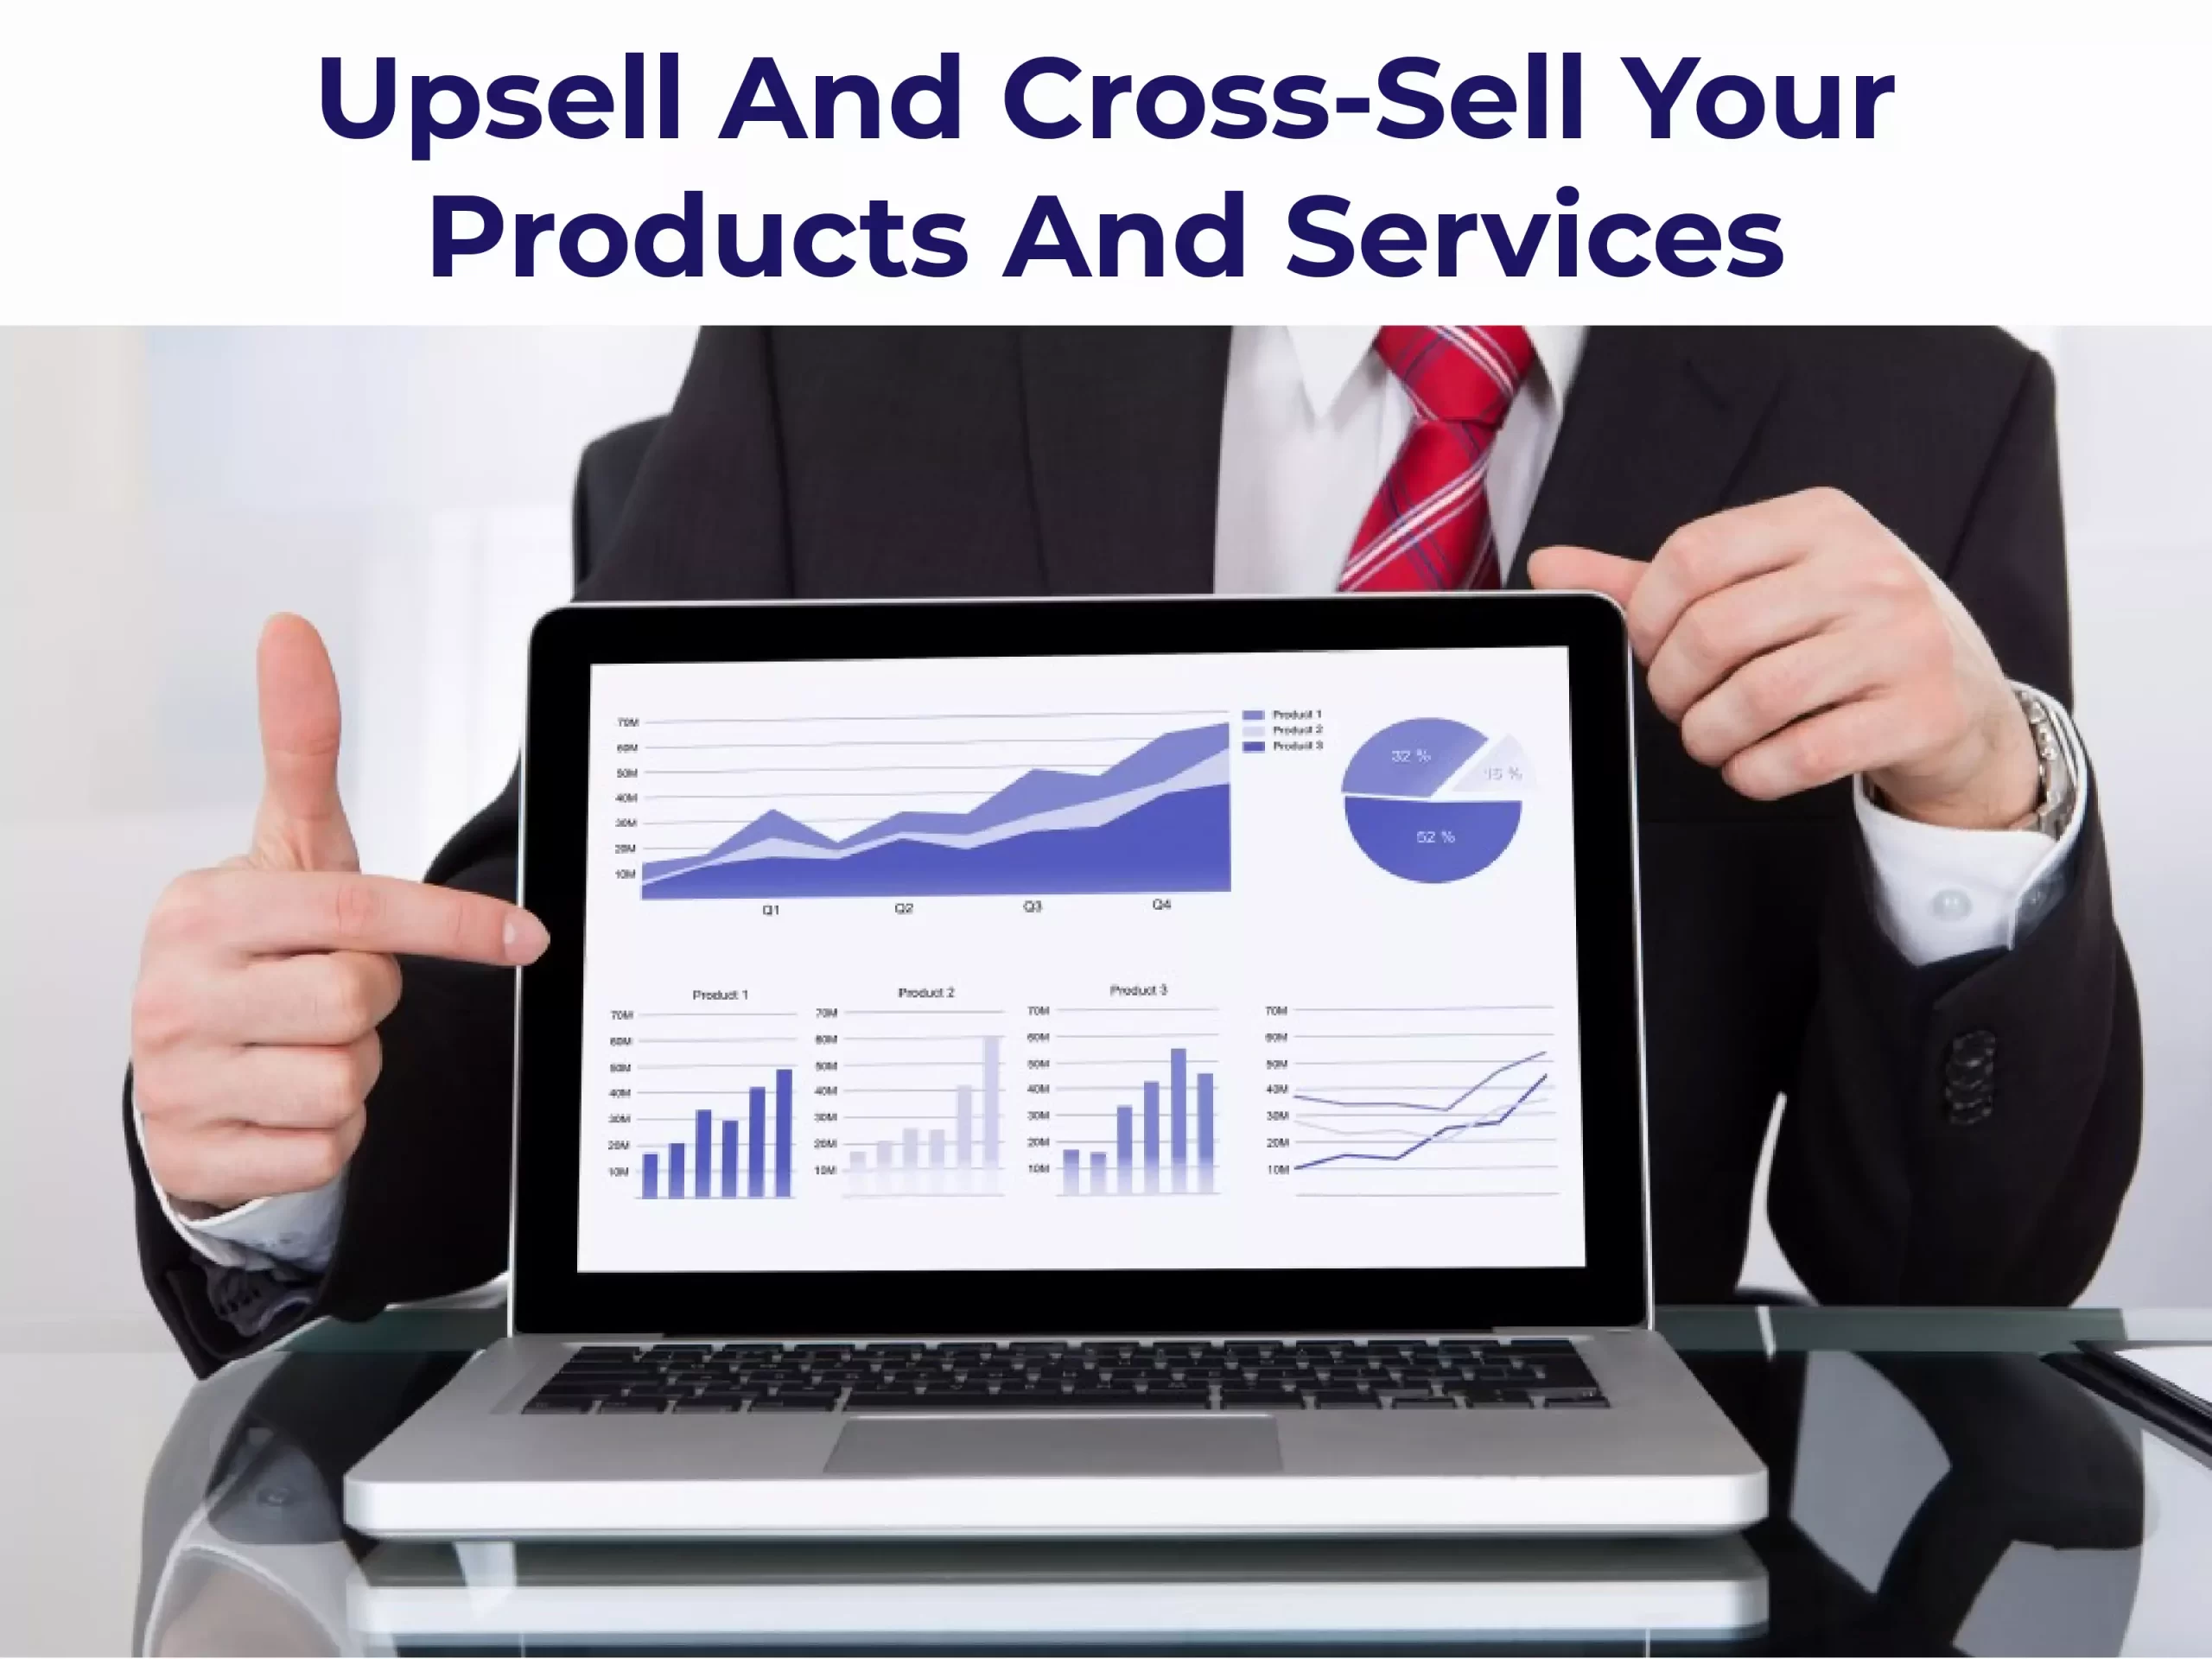 Upsell And Cross-Sell Your Products And Services